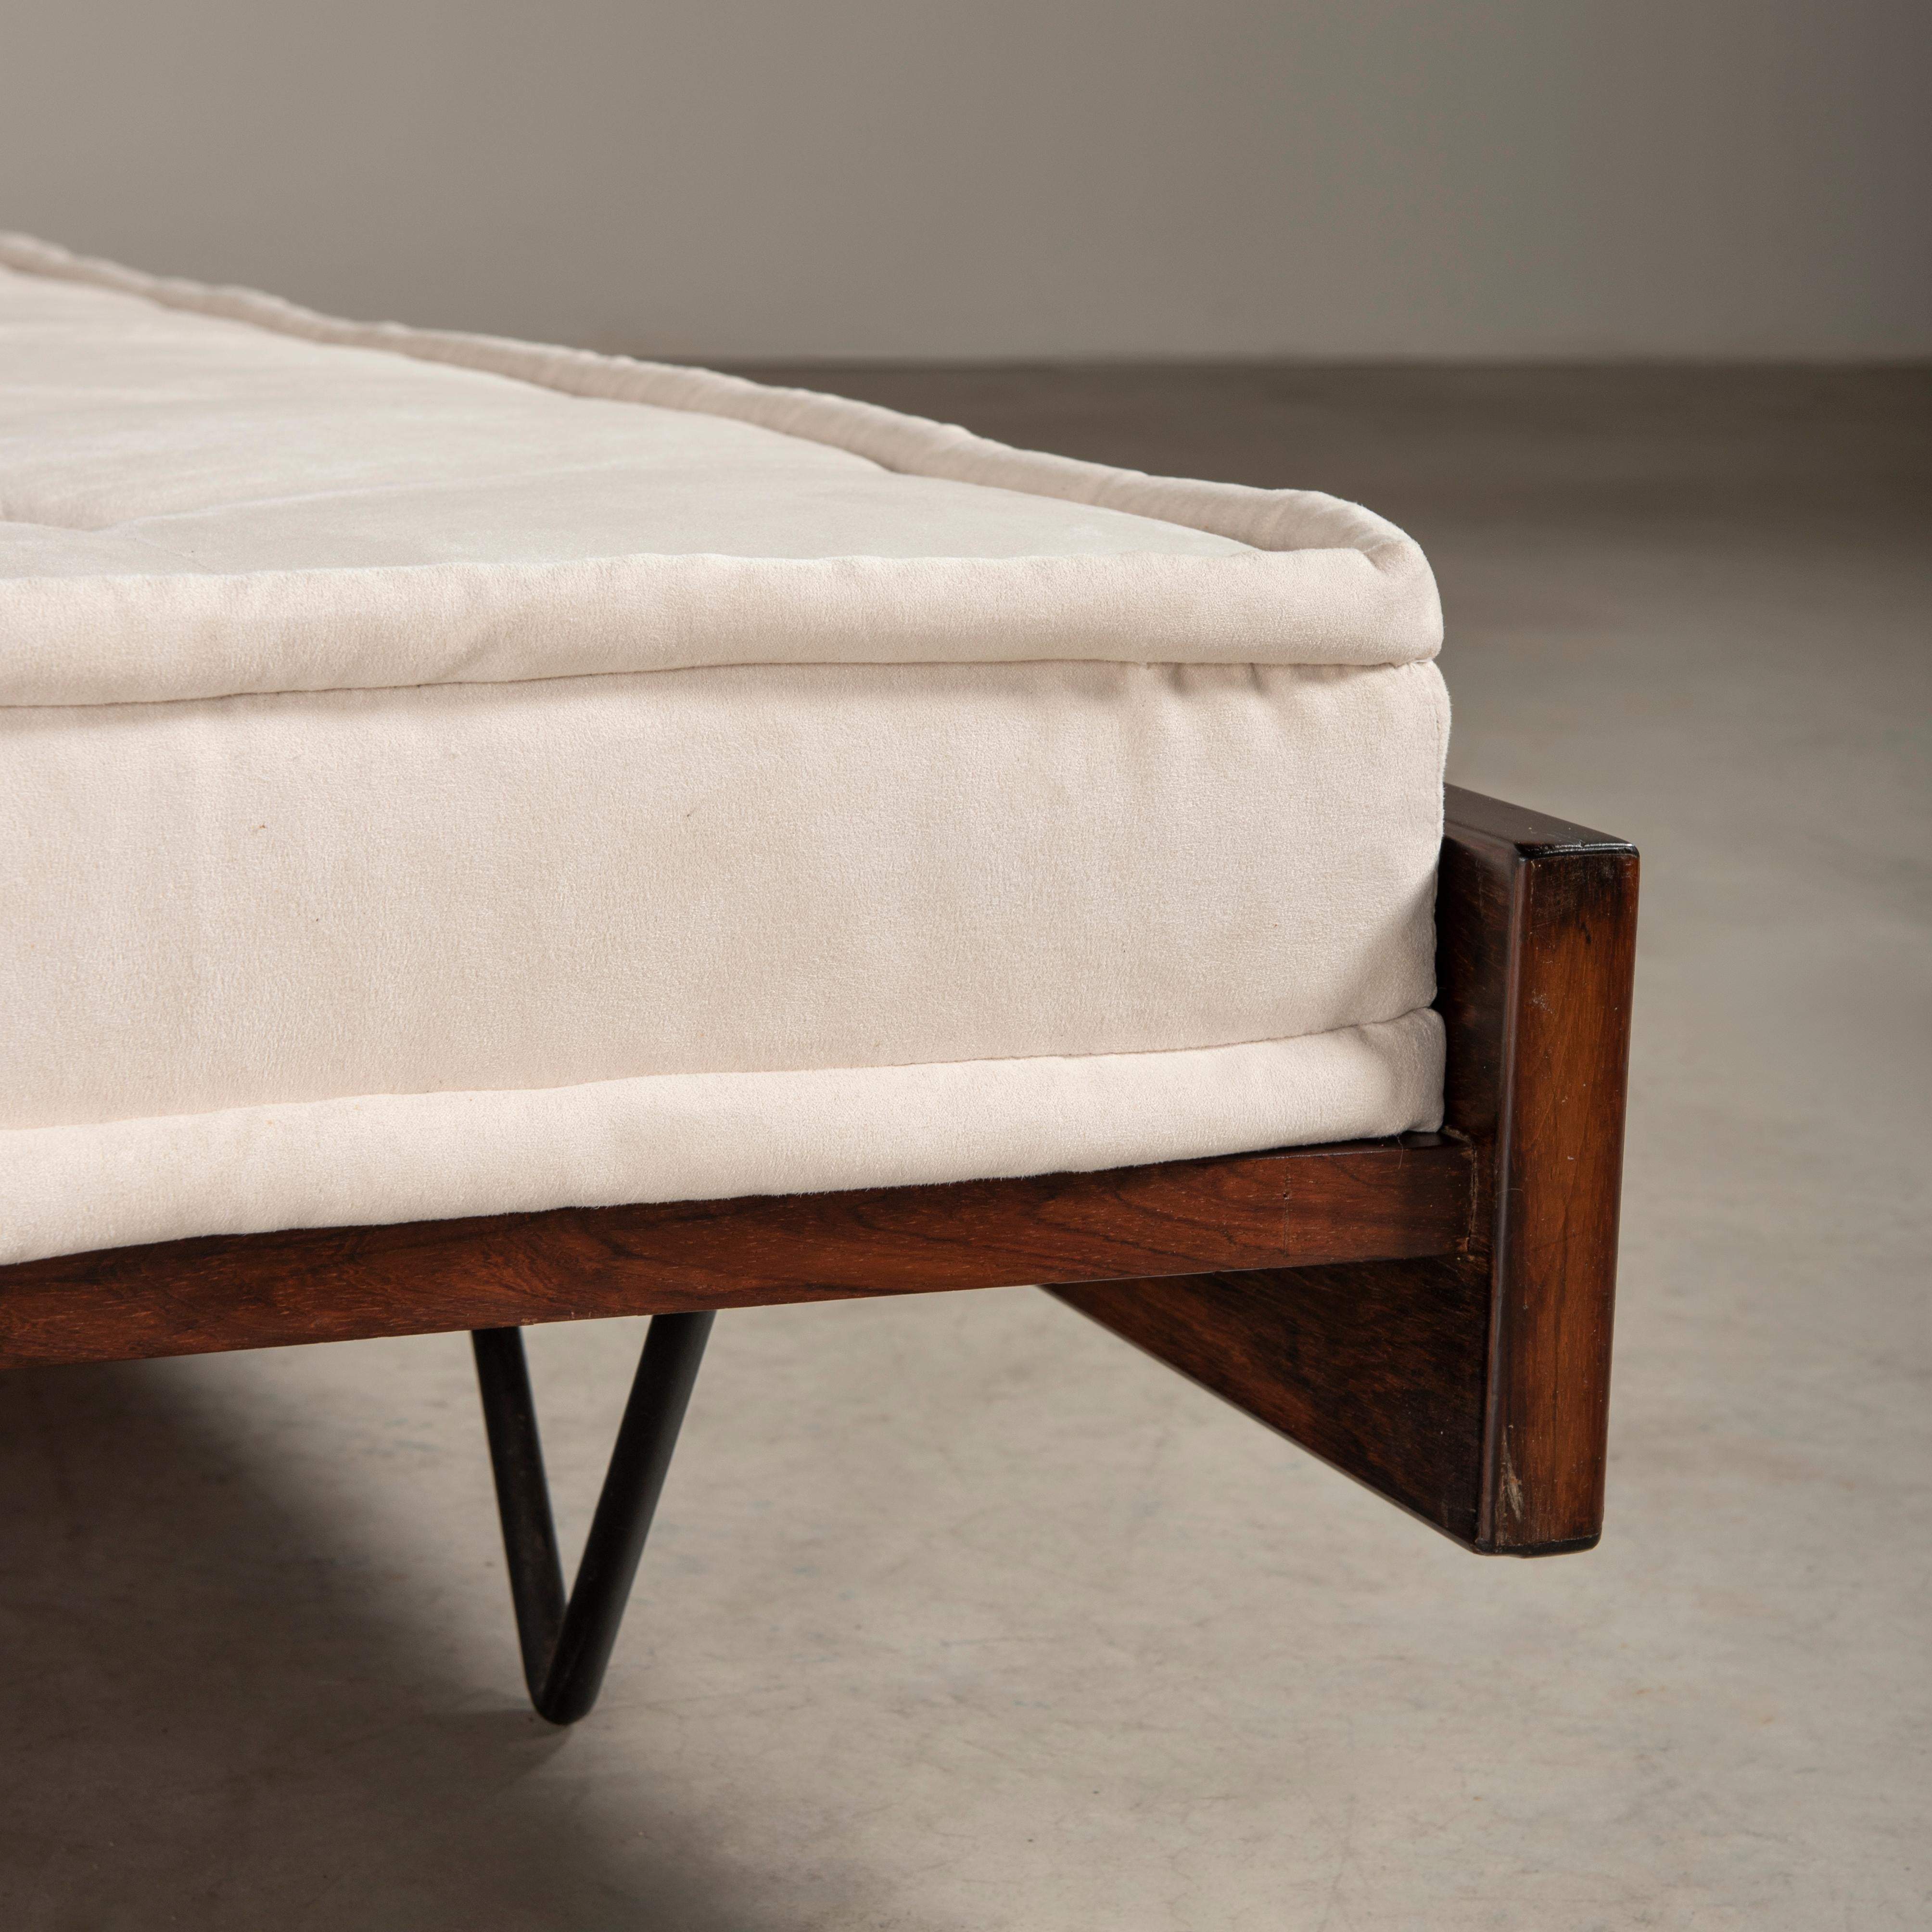 20th Century Daybed in Tropical Hardwood and Iron, Jorge Zalszupin, Brazilian Modern Design For Sale